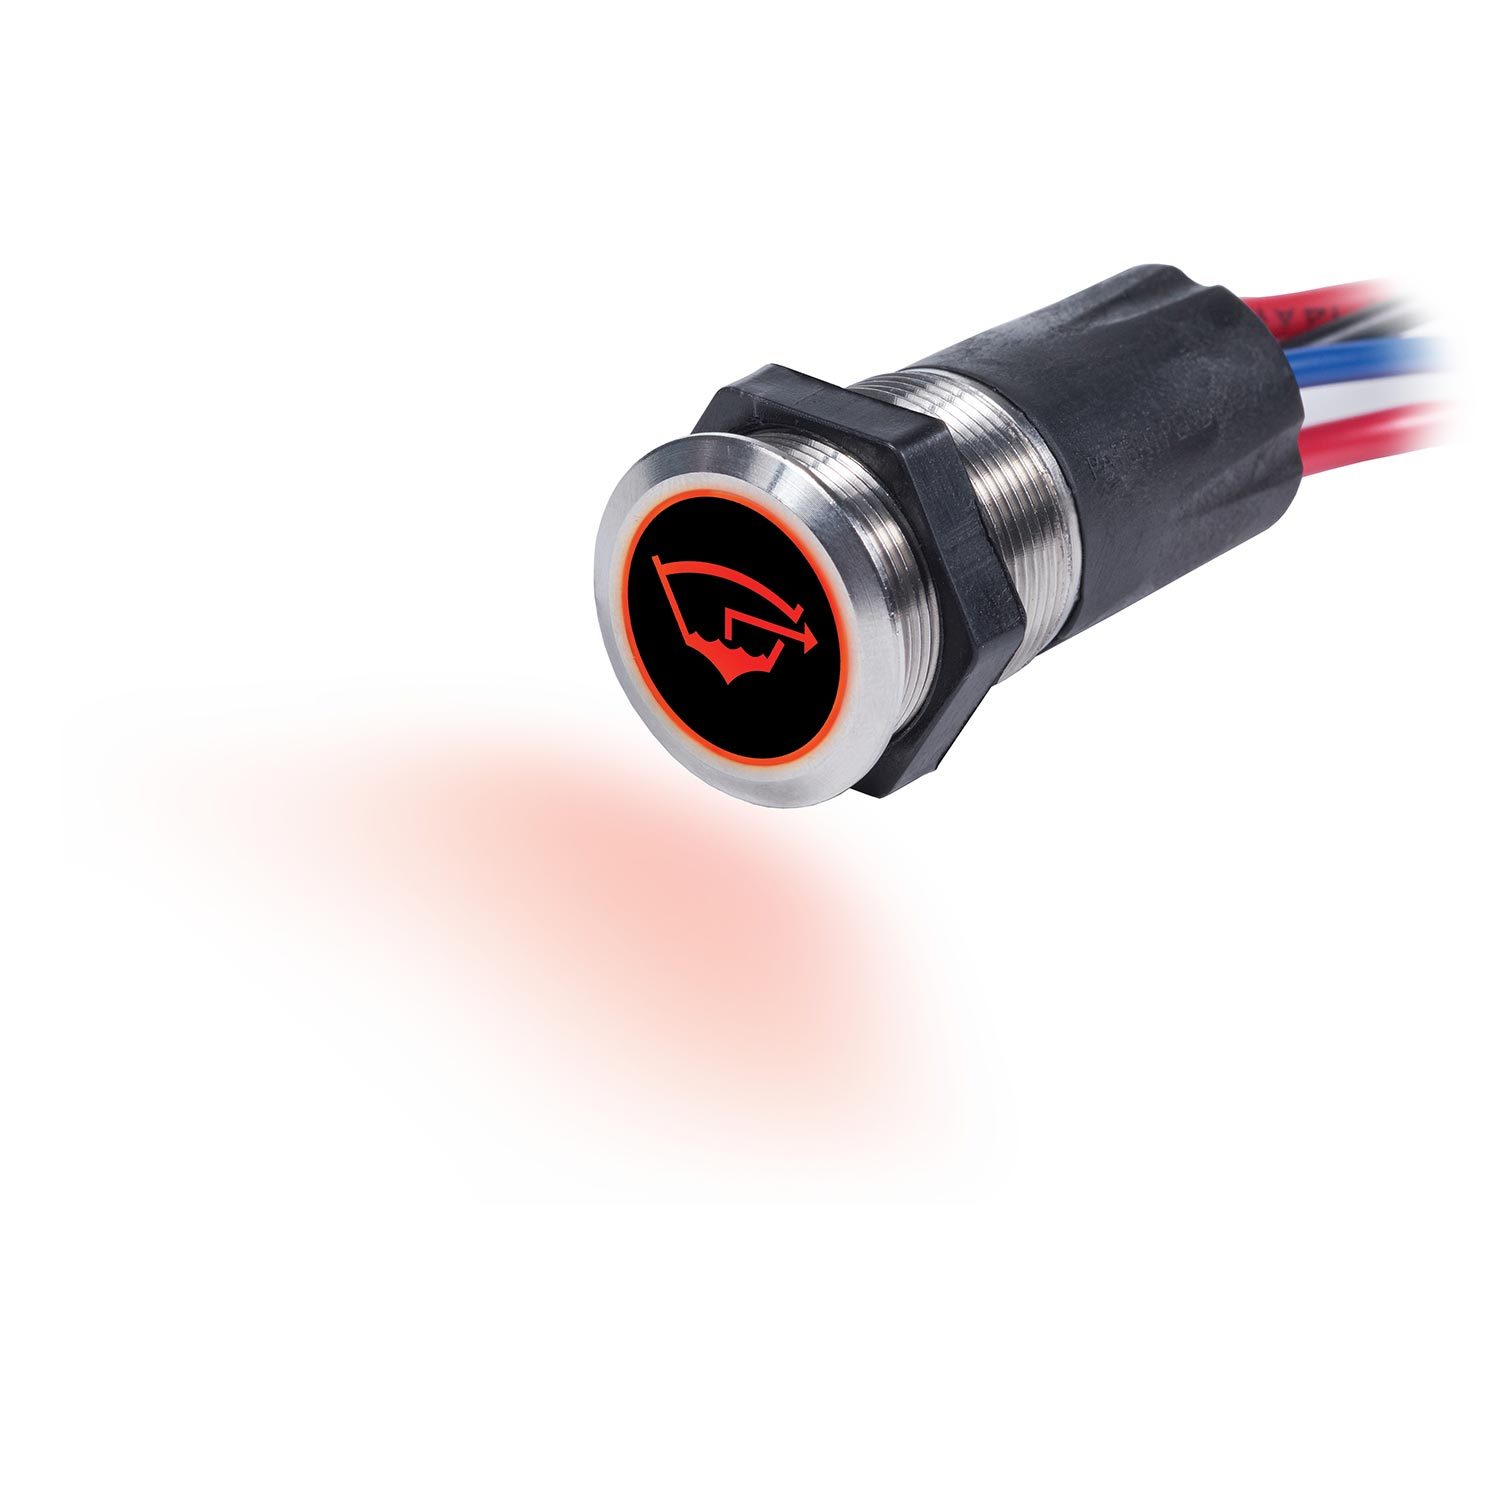 0-597-15  12V 10A Red Illuminated On-Off Push-Pull Switch